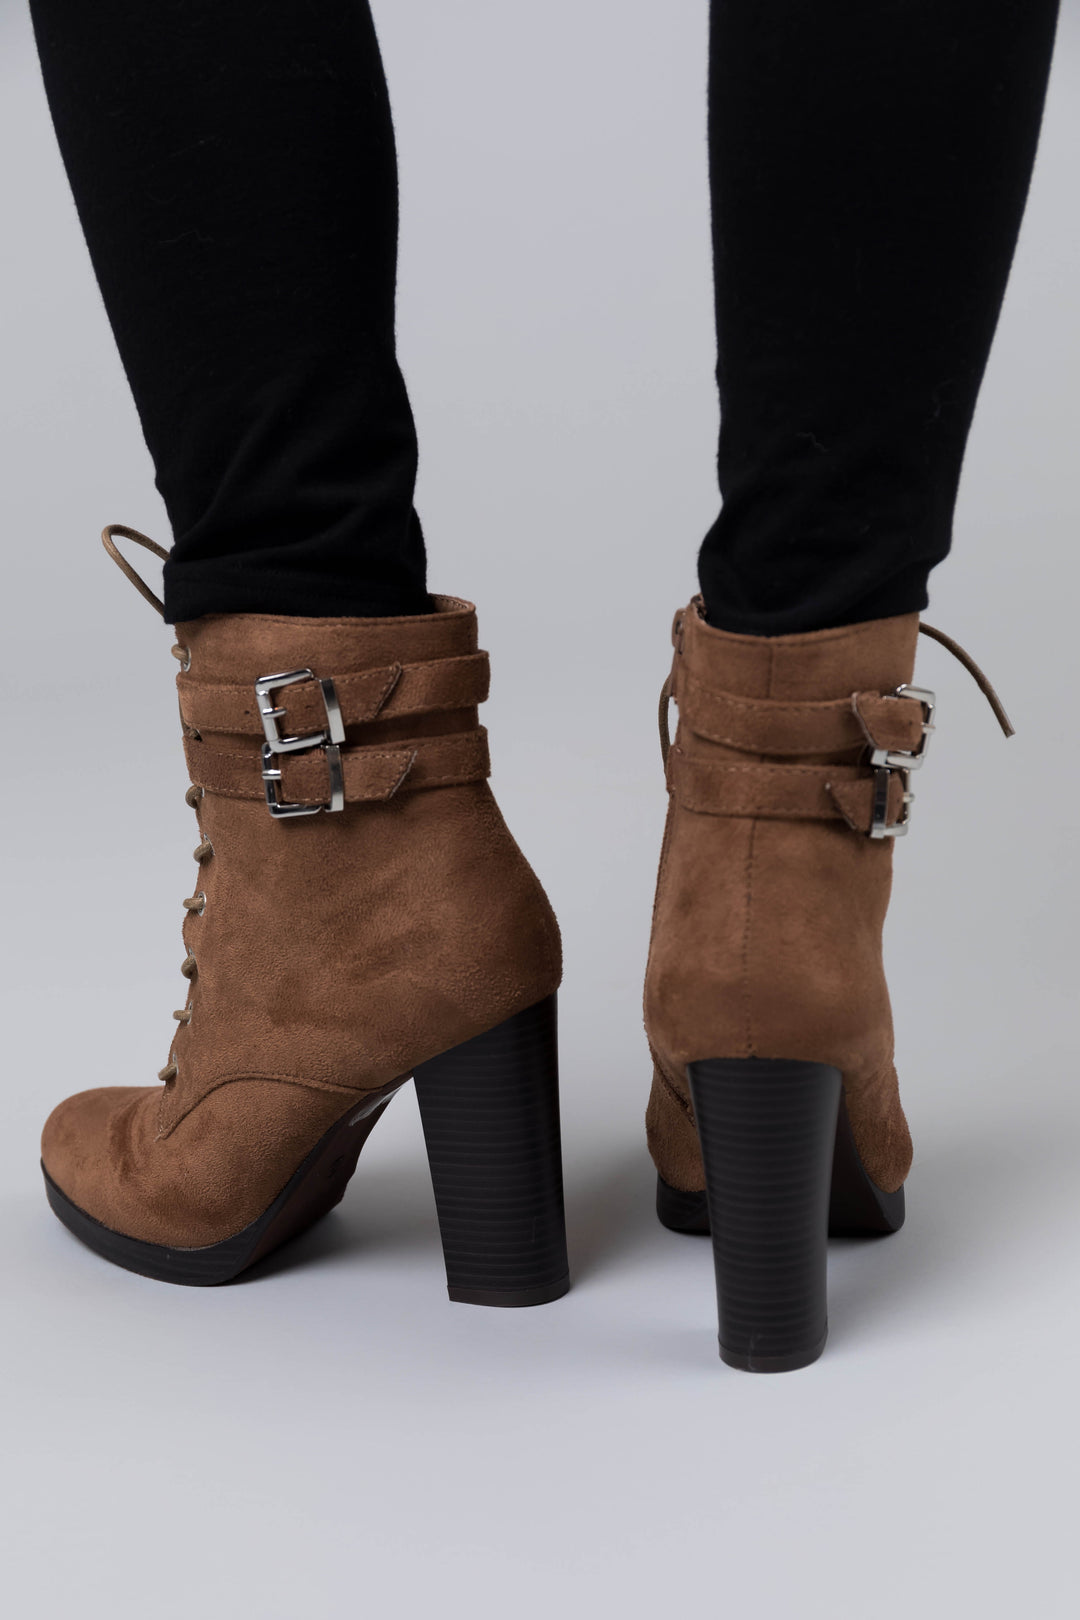 Milk Chocolate Faux Suede Lace Up High Heel Booties & Lime Lush